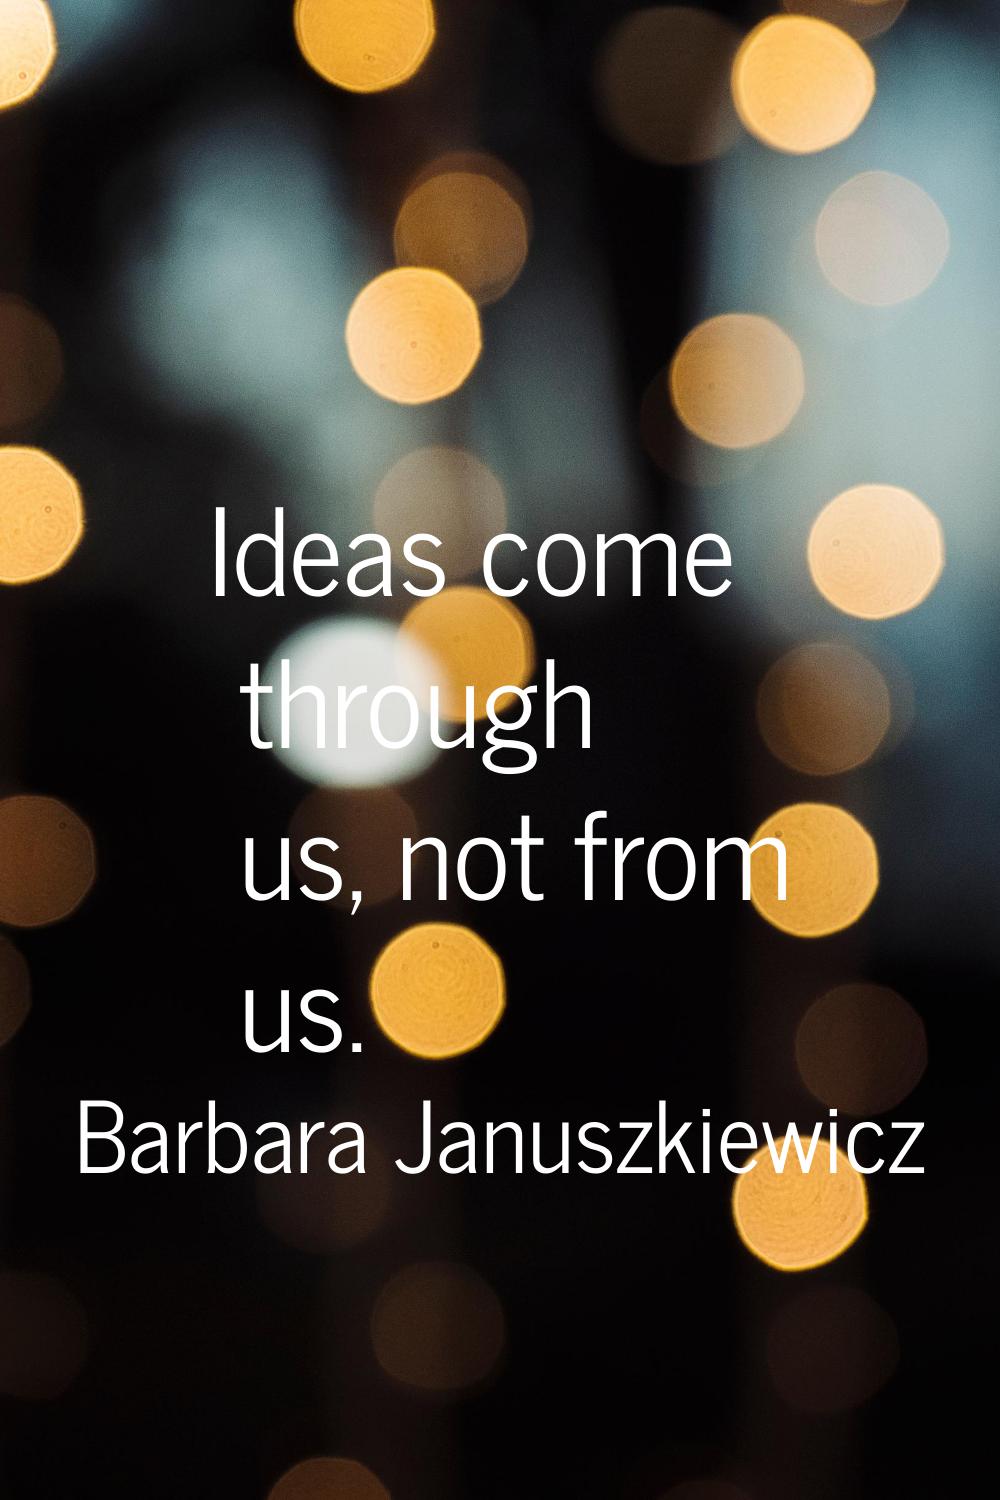 Ideas come through us, not from us.